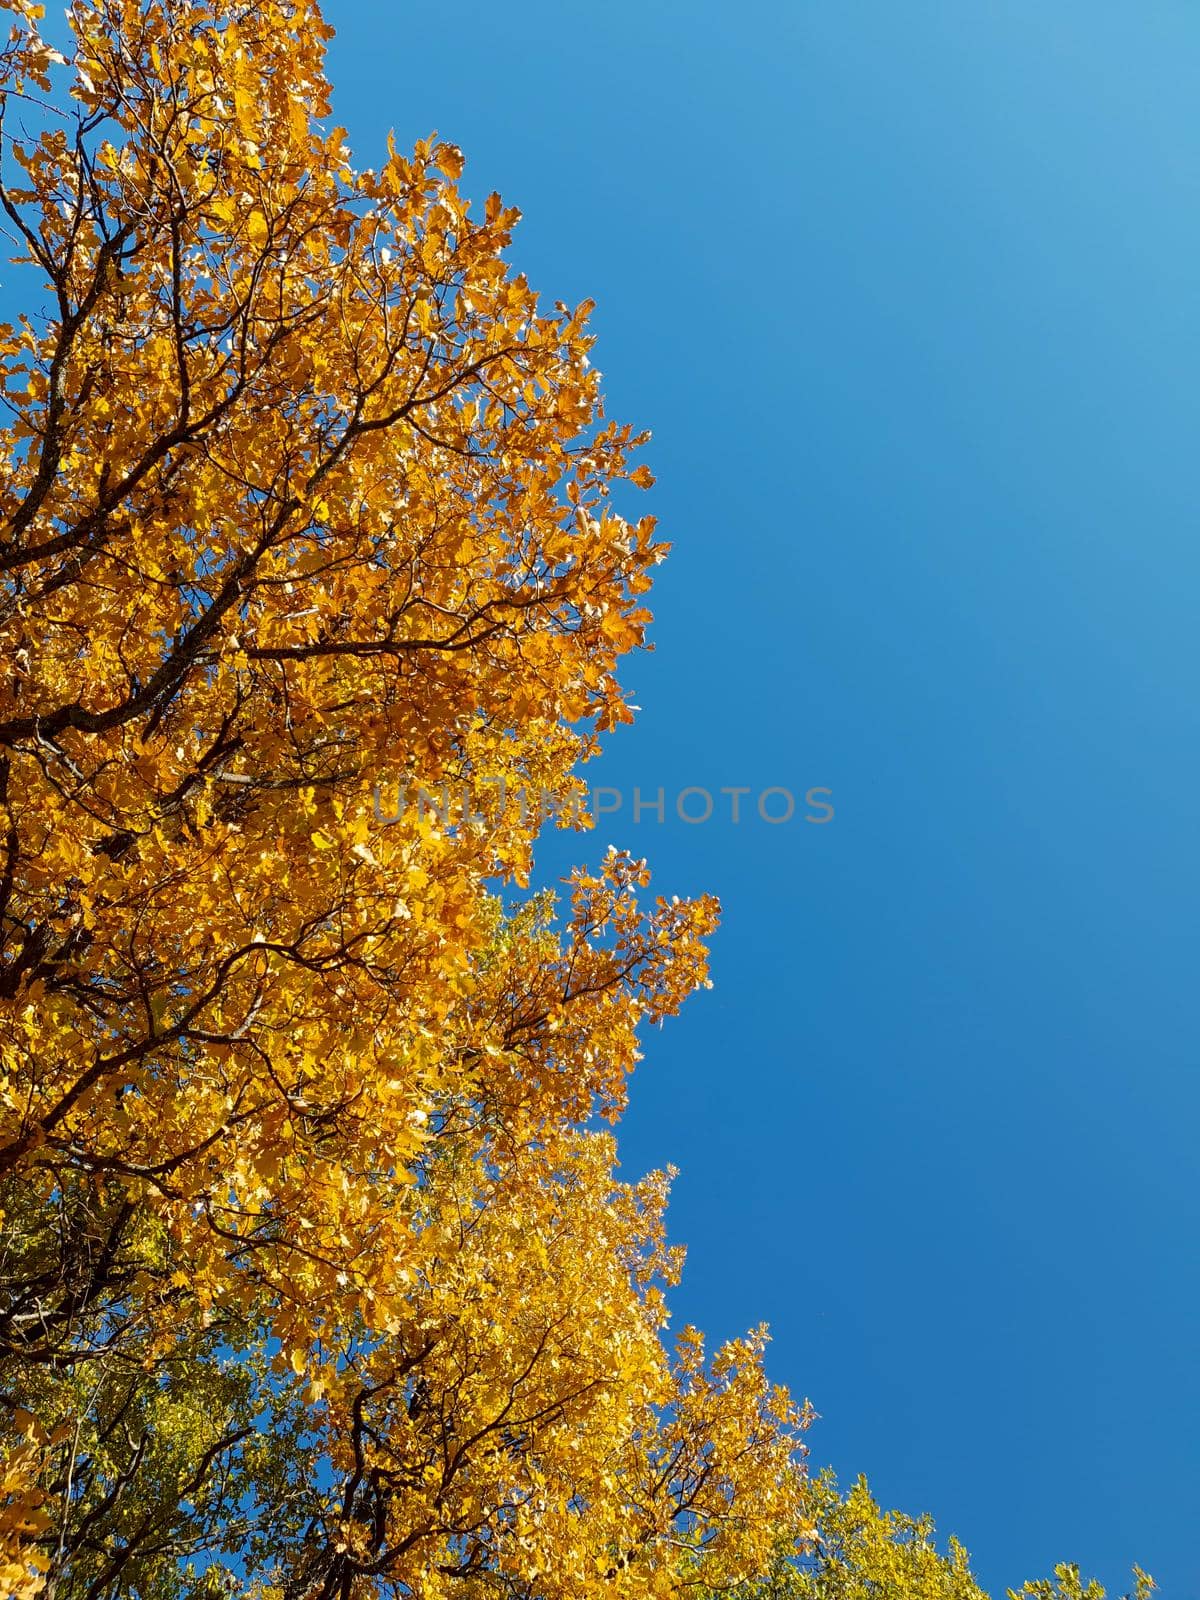 Yellow tree leaves against a clear blue sky. High quality photo